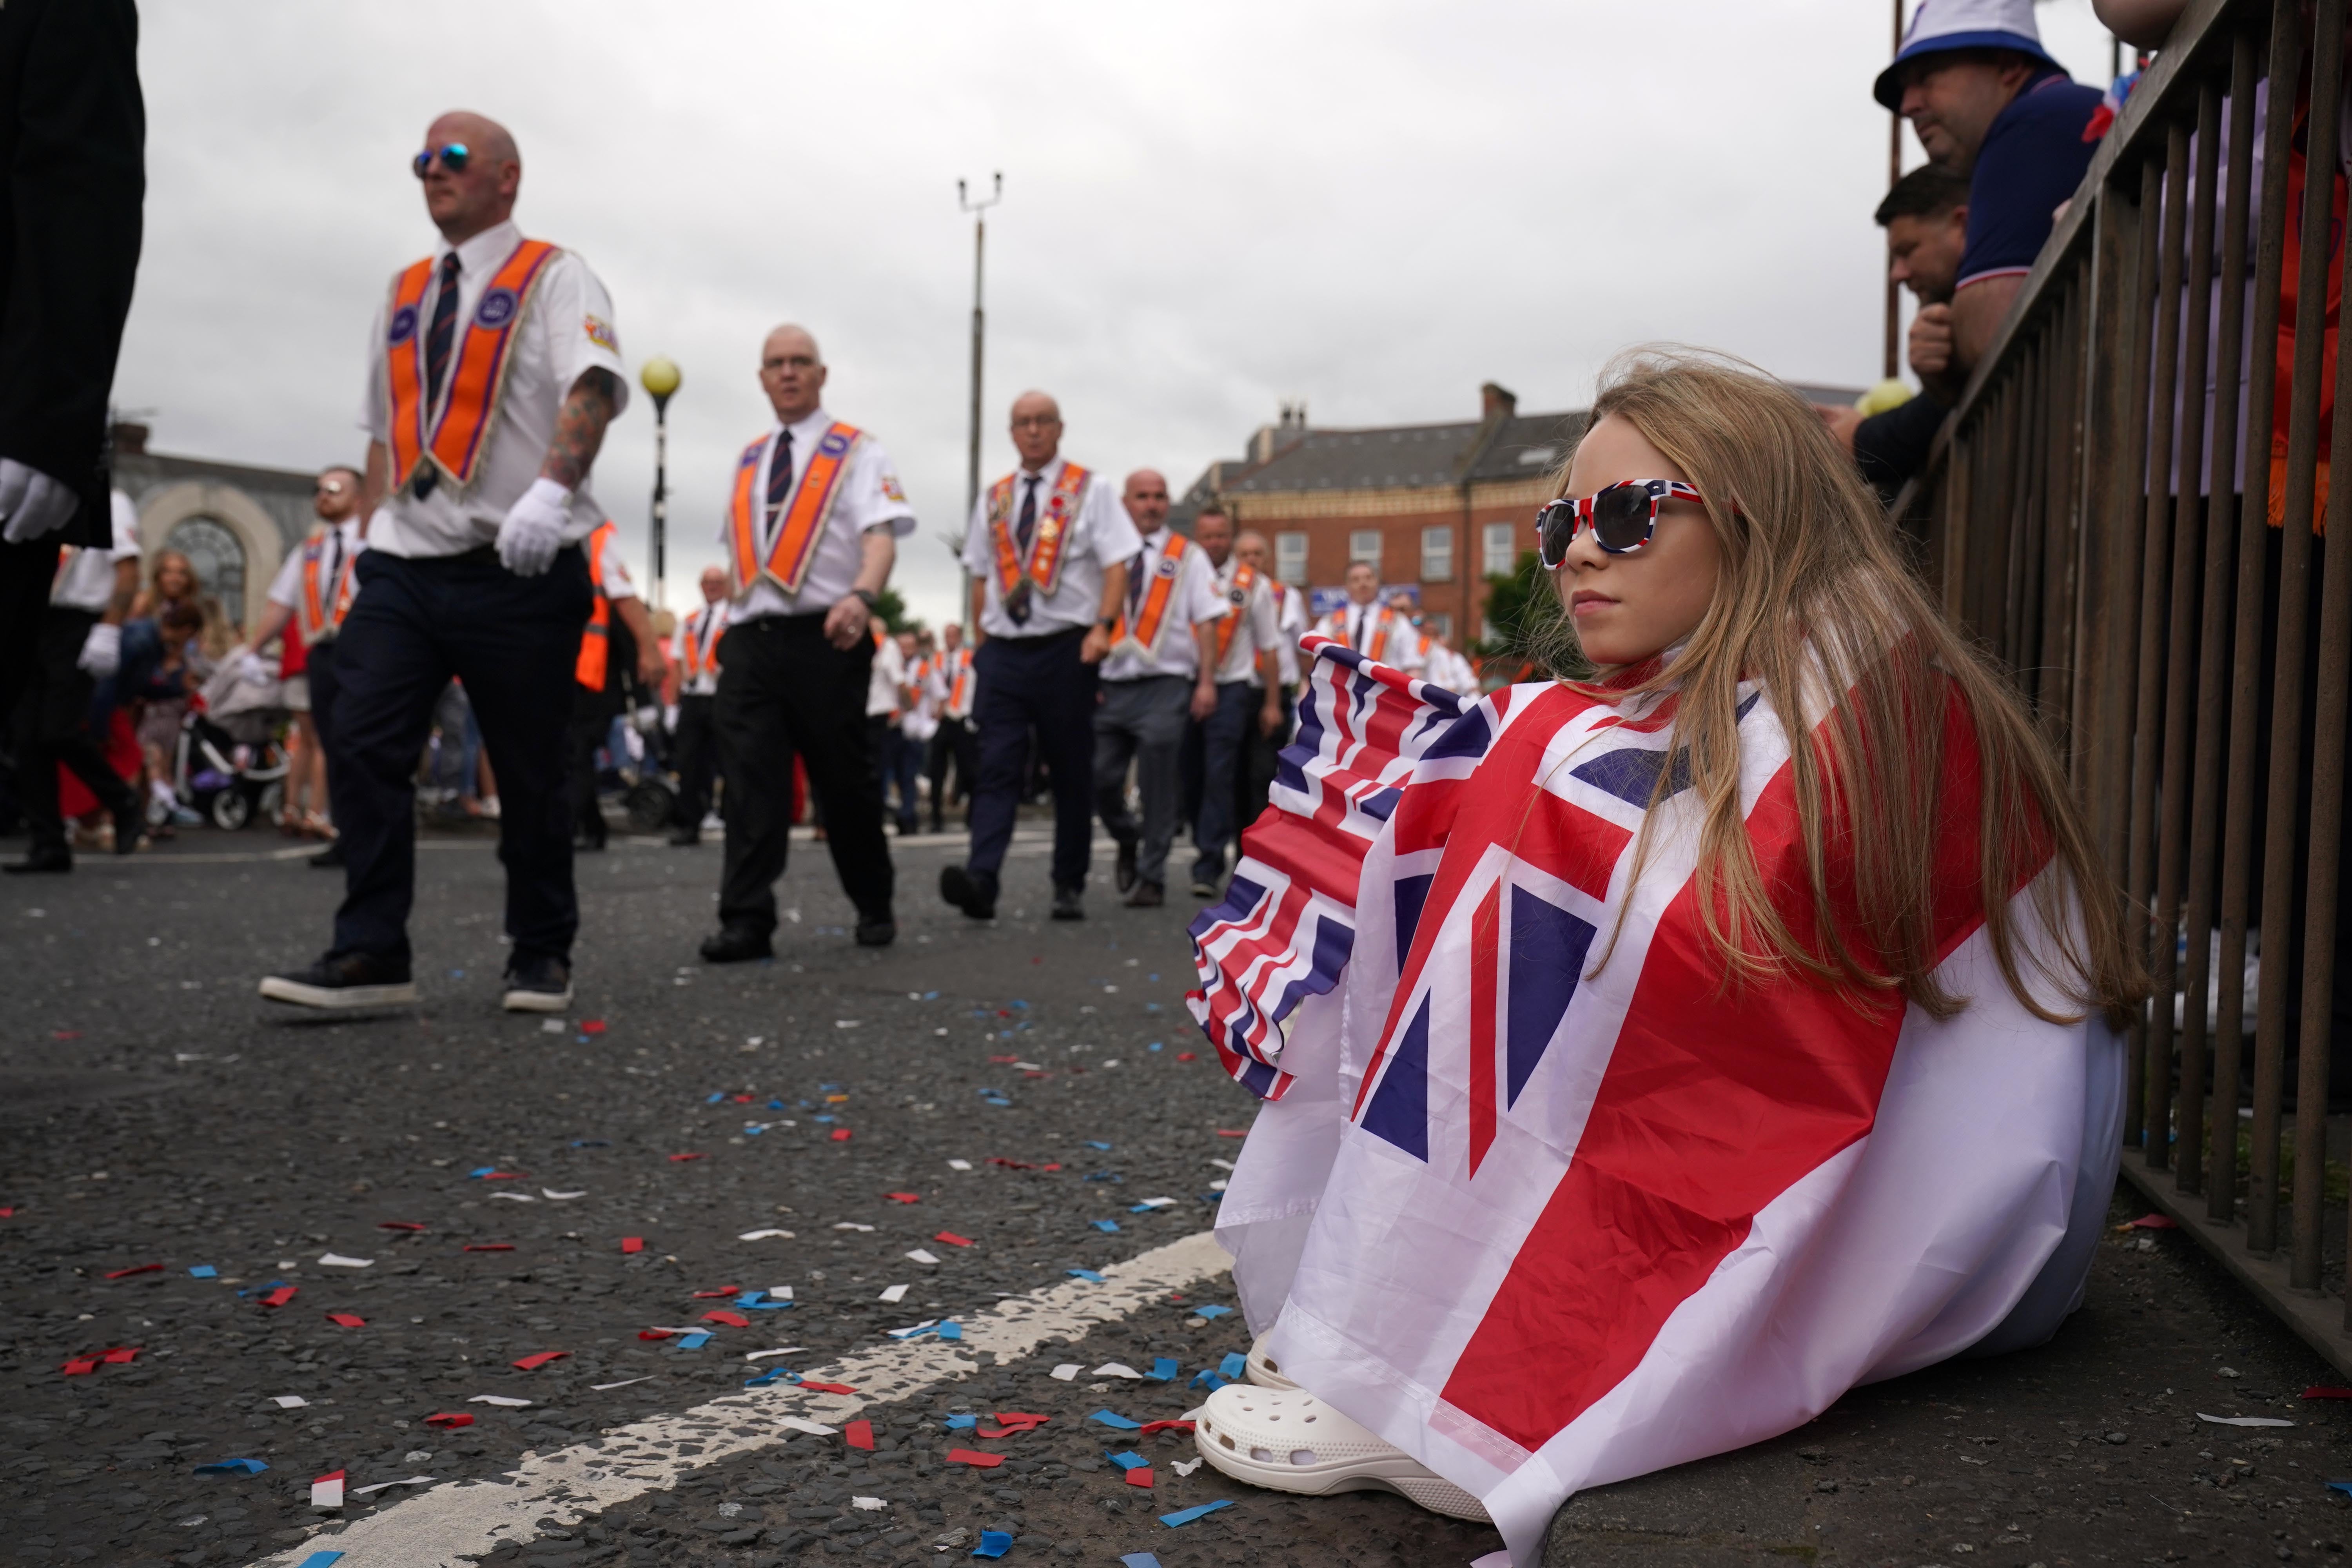 Grace Moffett, aged 11, was draped in a flag as she watched Orange Order members march past (Brian Lawless/PA)